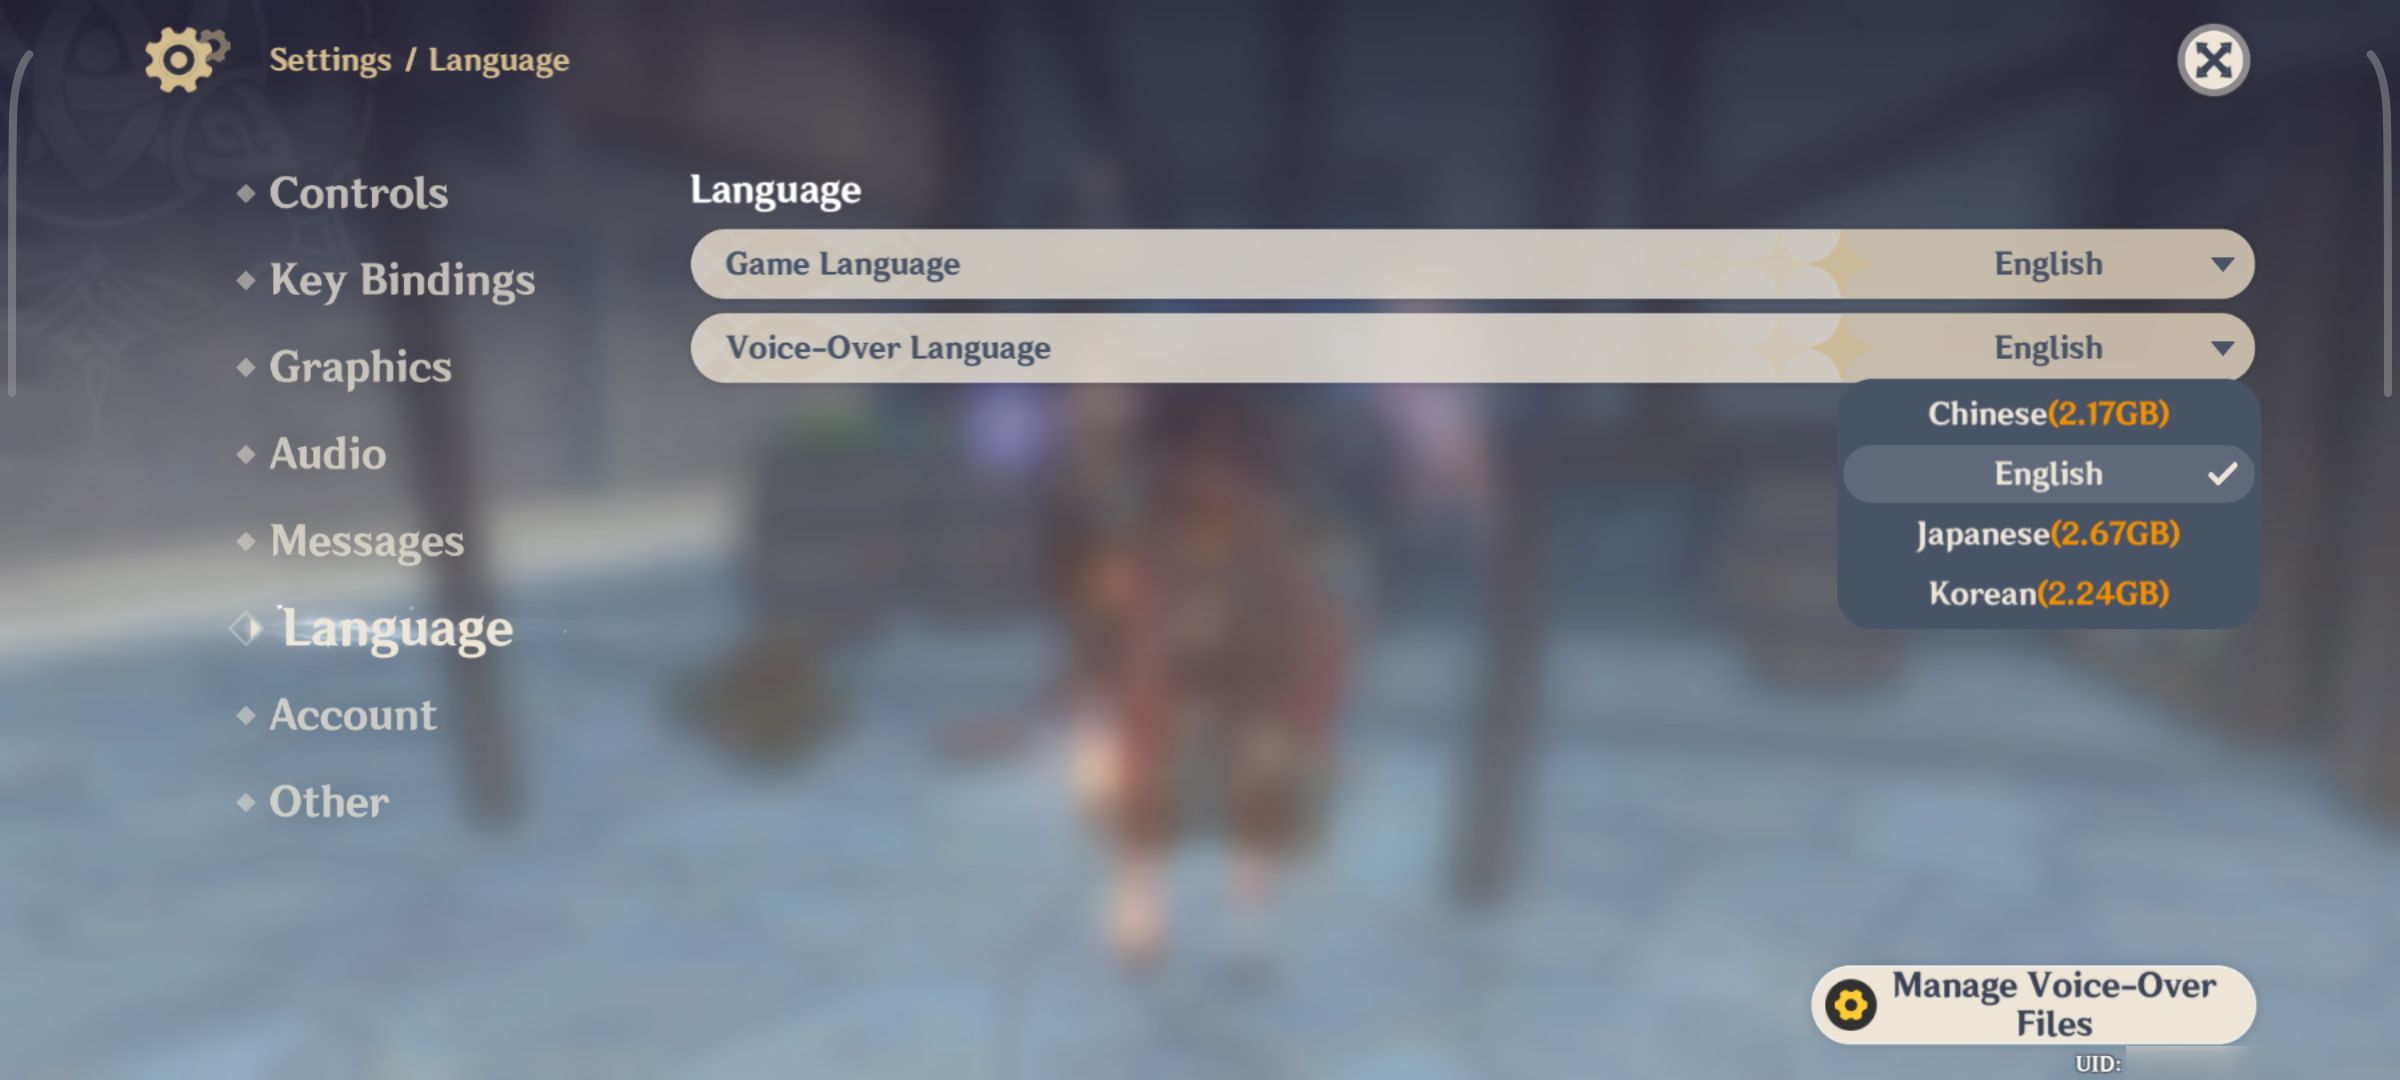 Listed voice-over language downloadable packs in Genshin Impact on Android